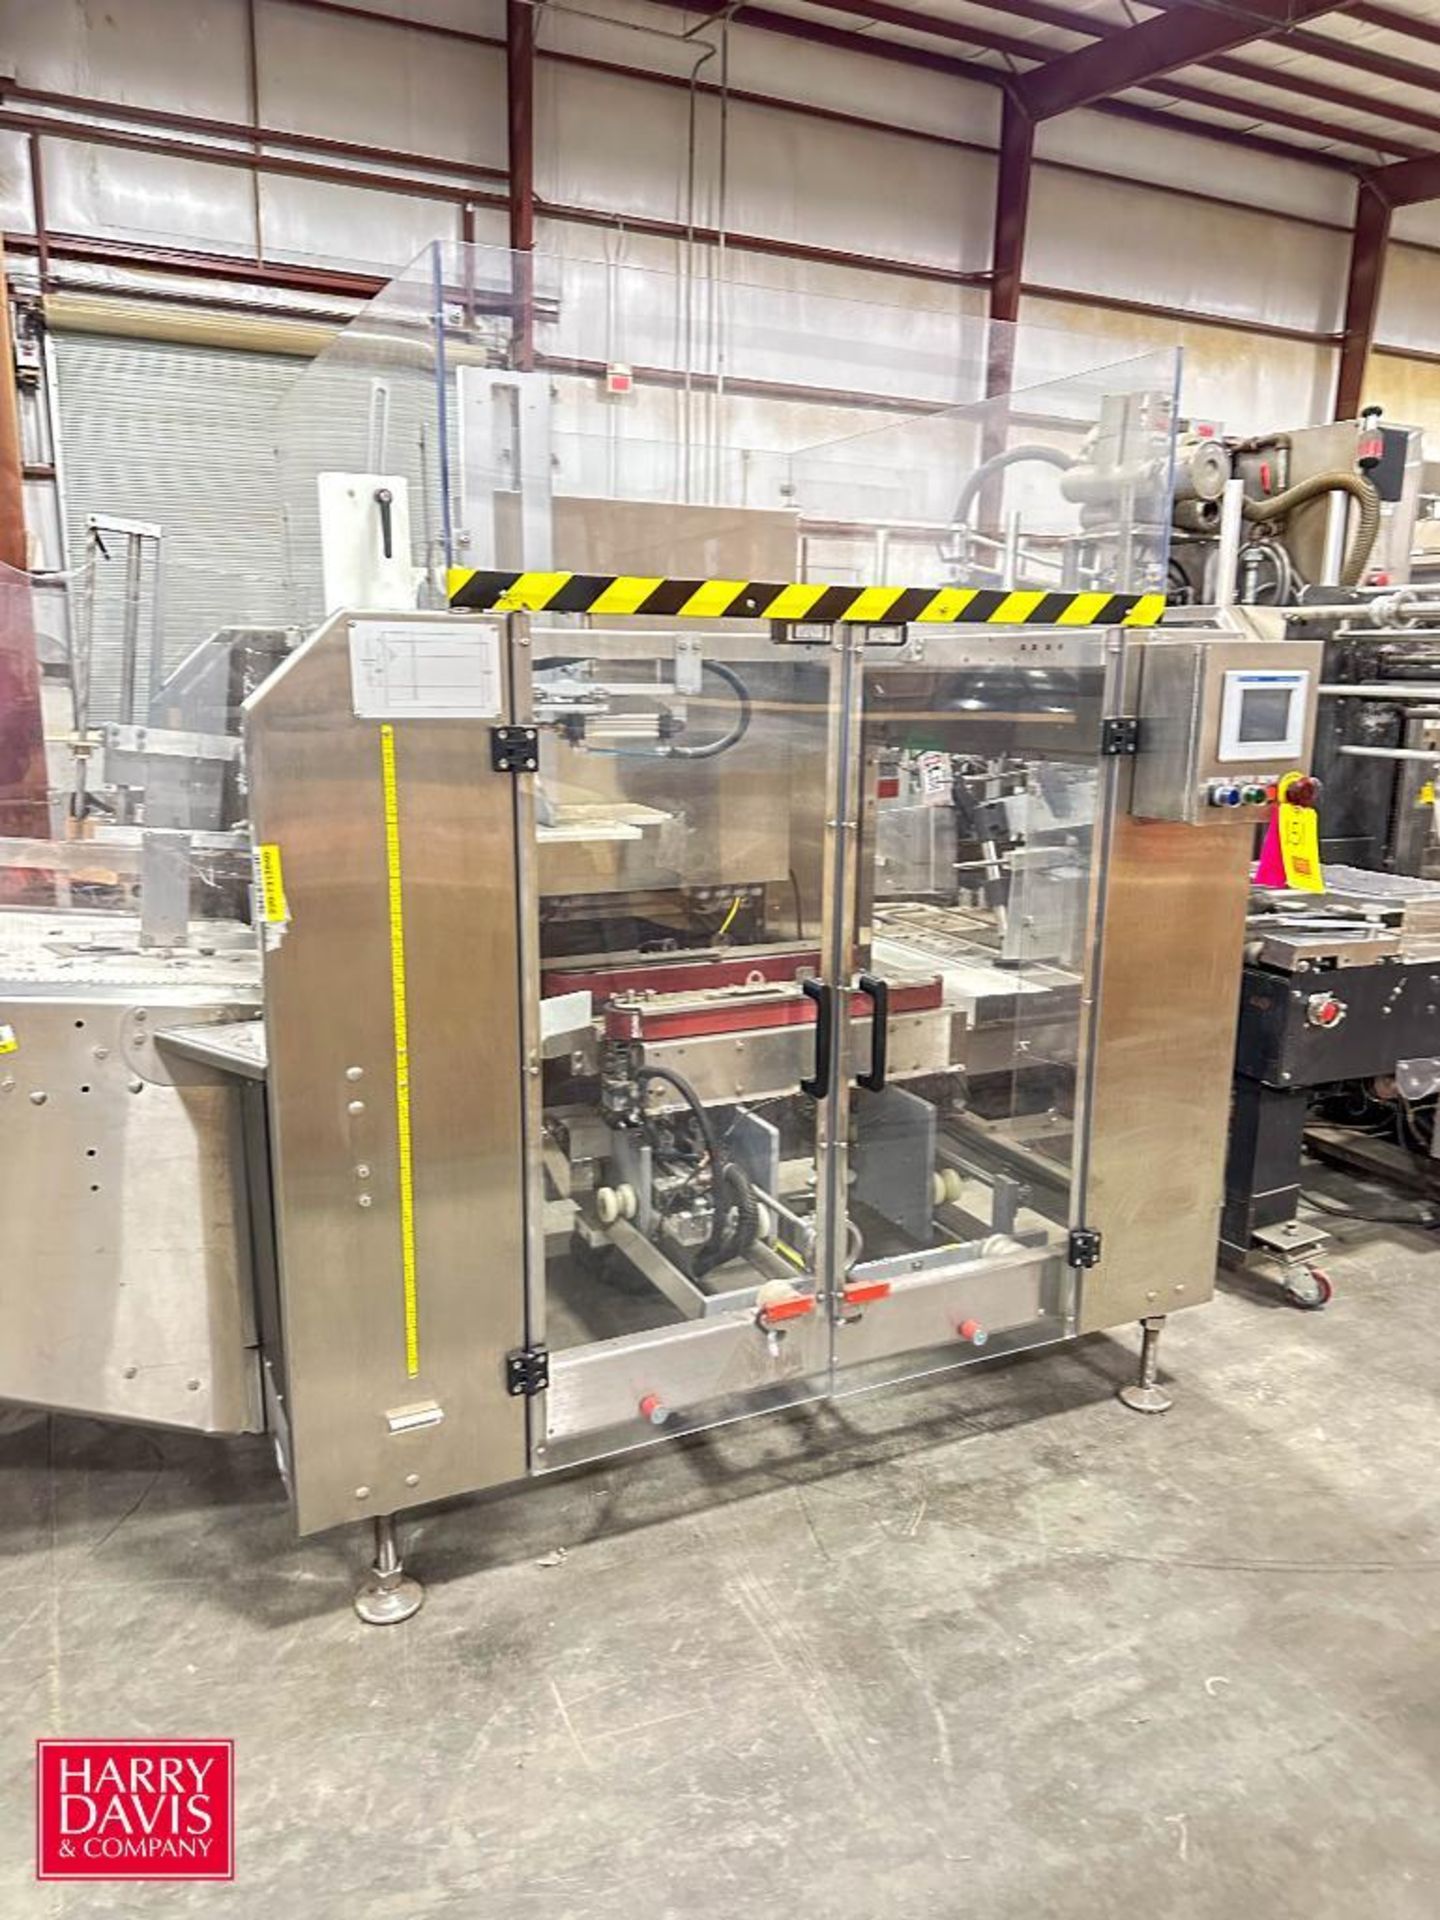 FALLAS S/S Case Erector, Model: CE400, S/N: CE370118-11 with Allen-Bradley MicroLogix PLC and